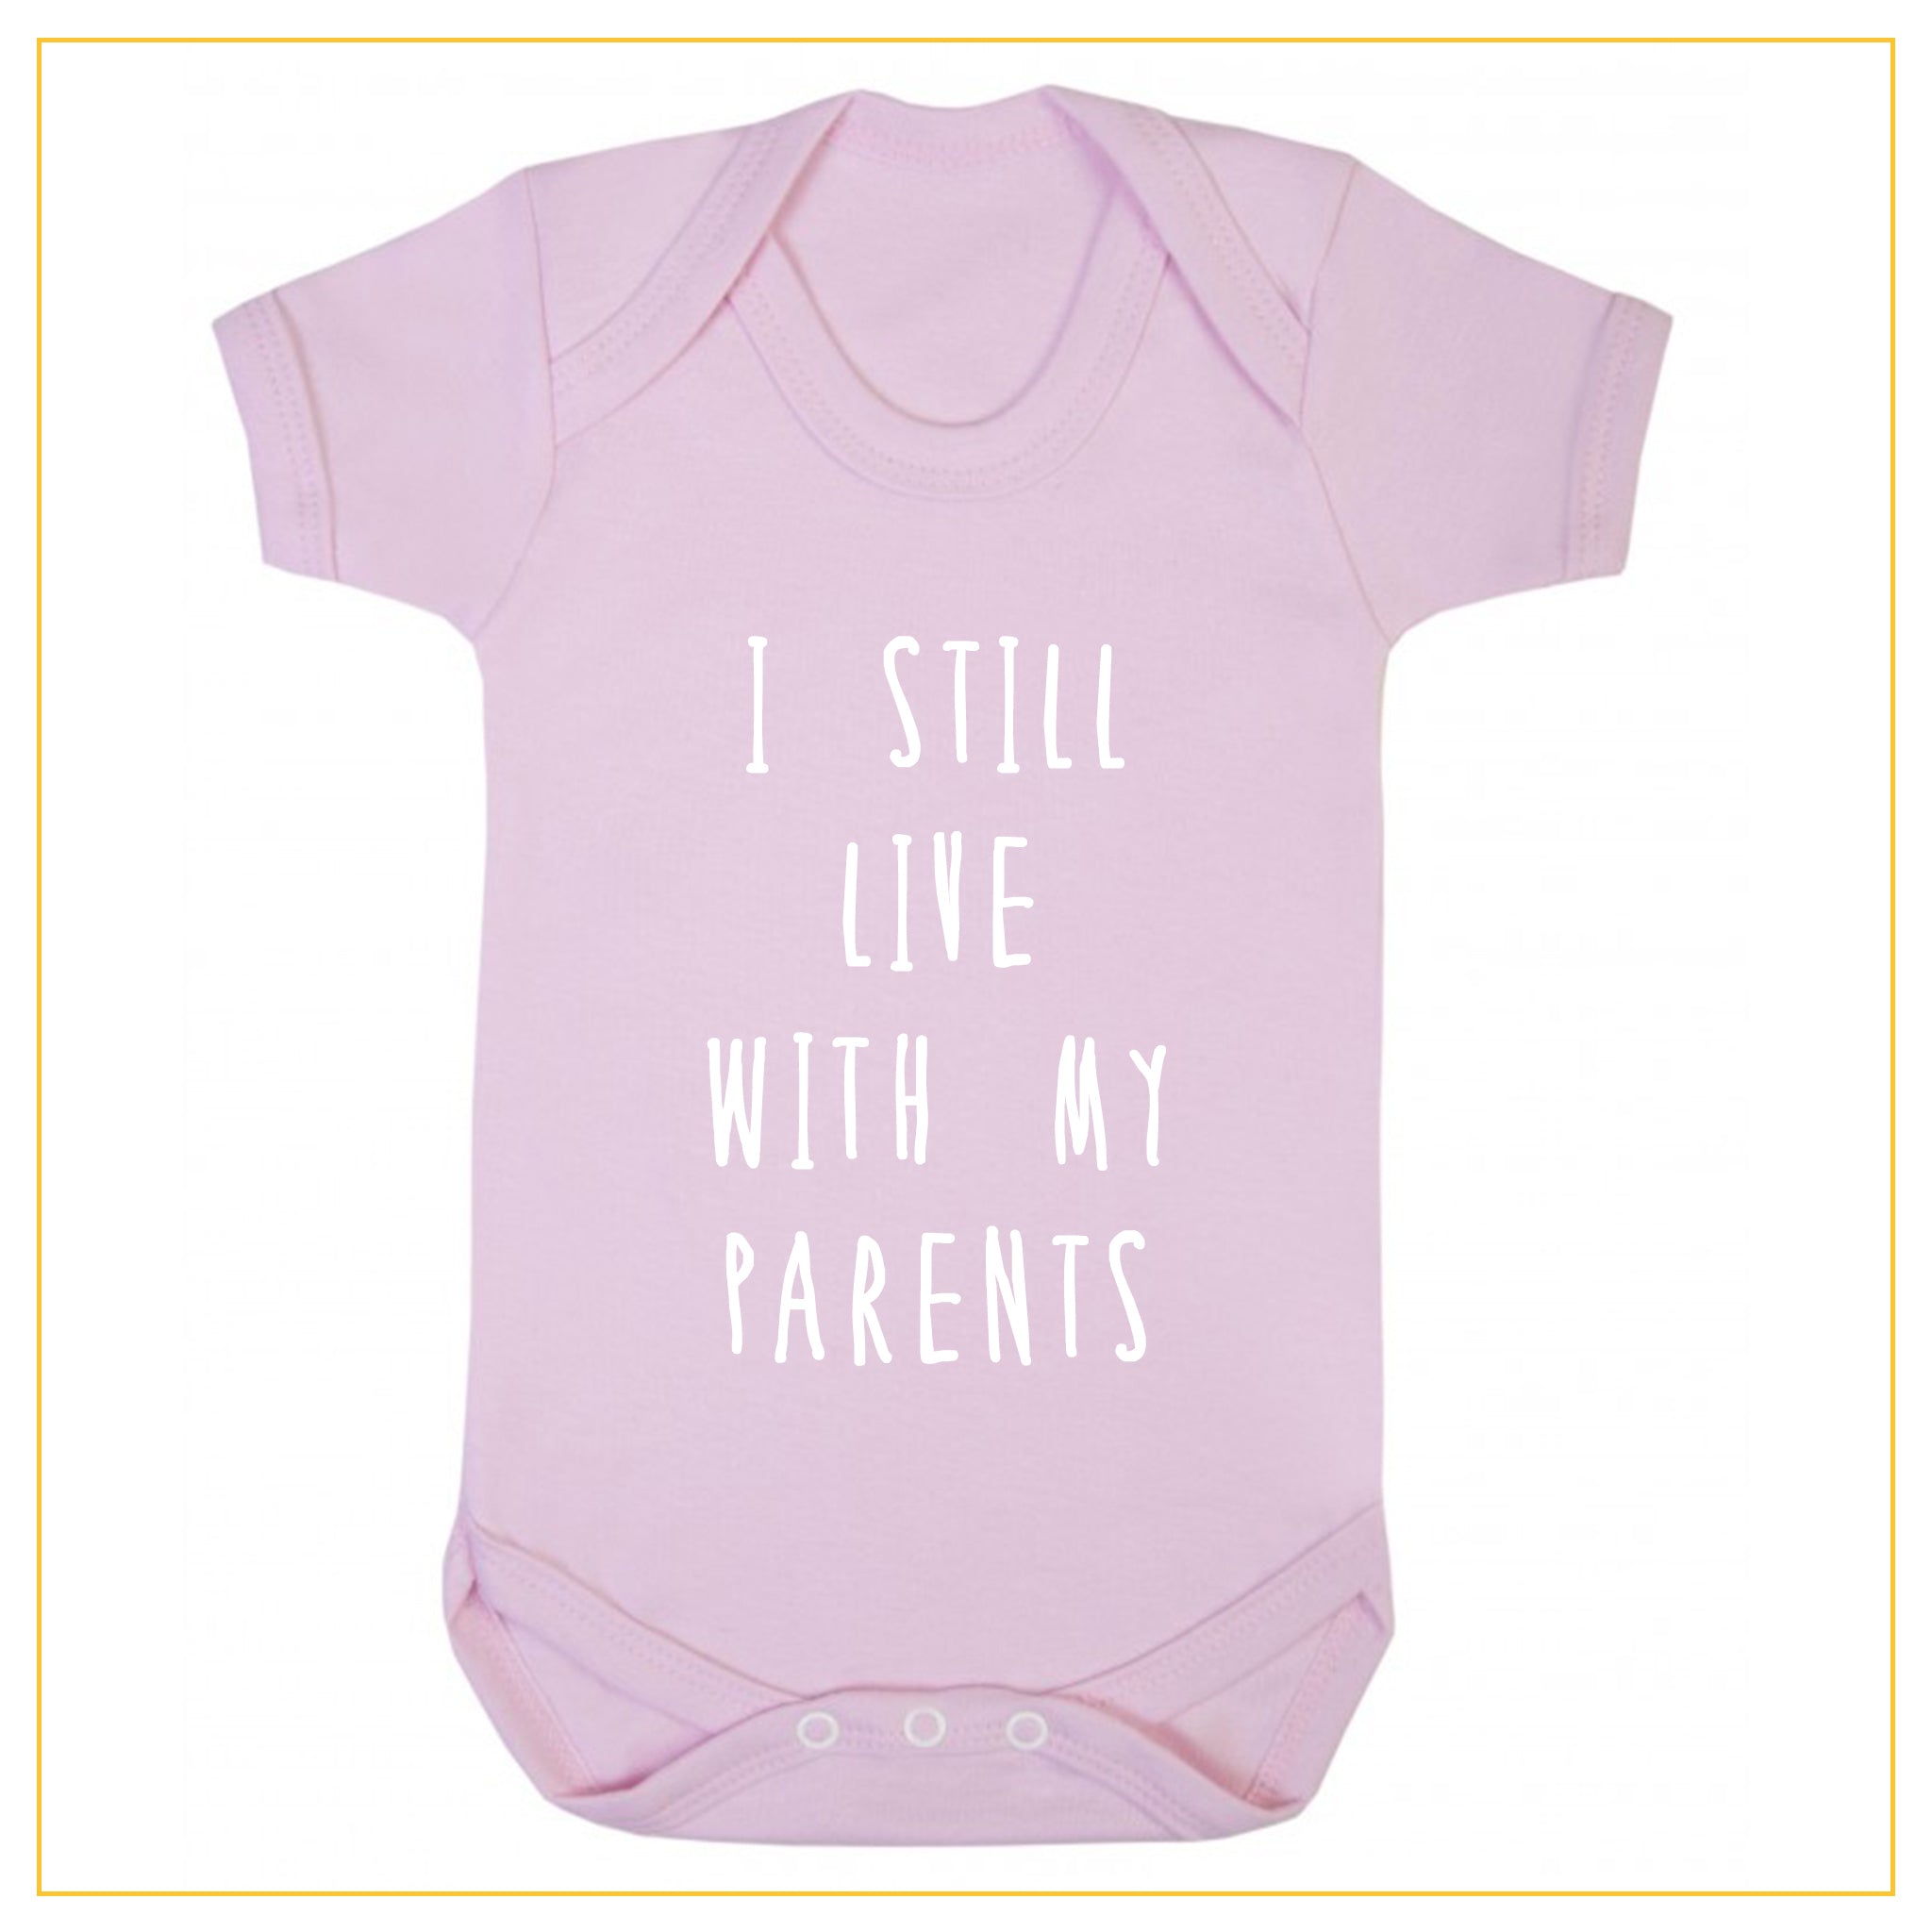 I still live with my parents baby onesie in dust pink